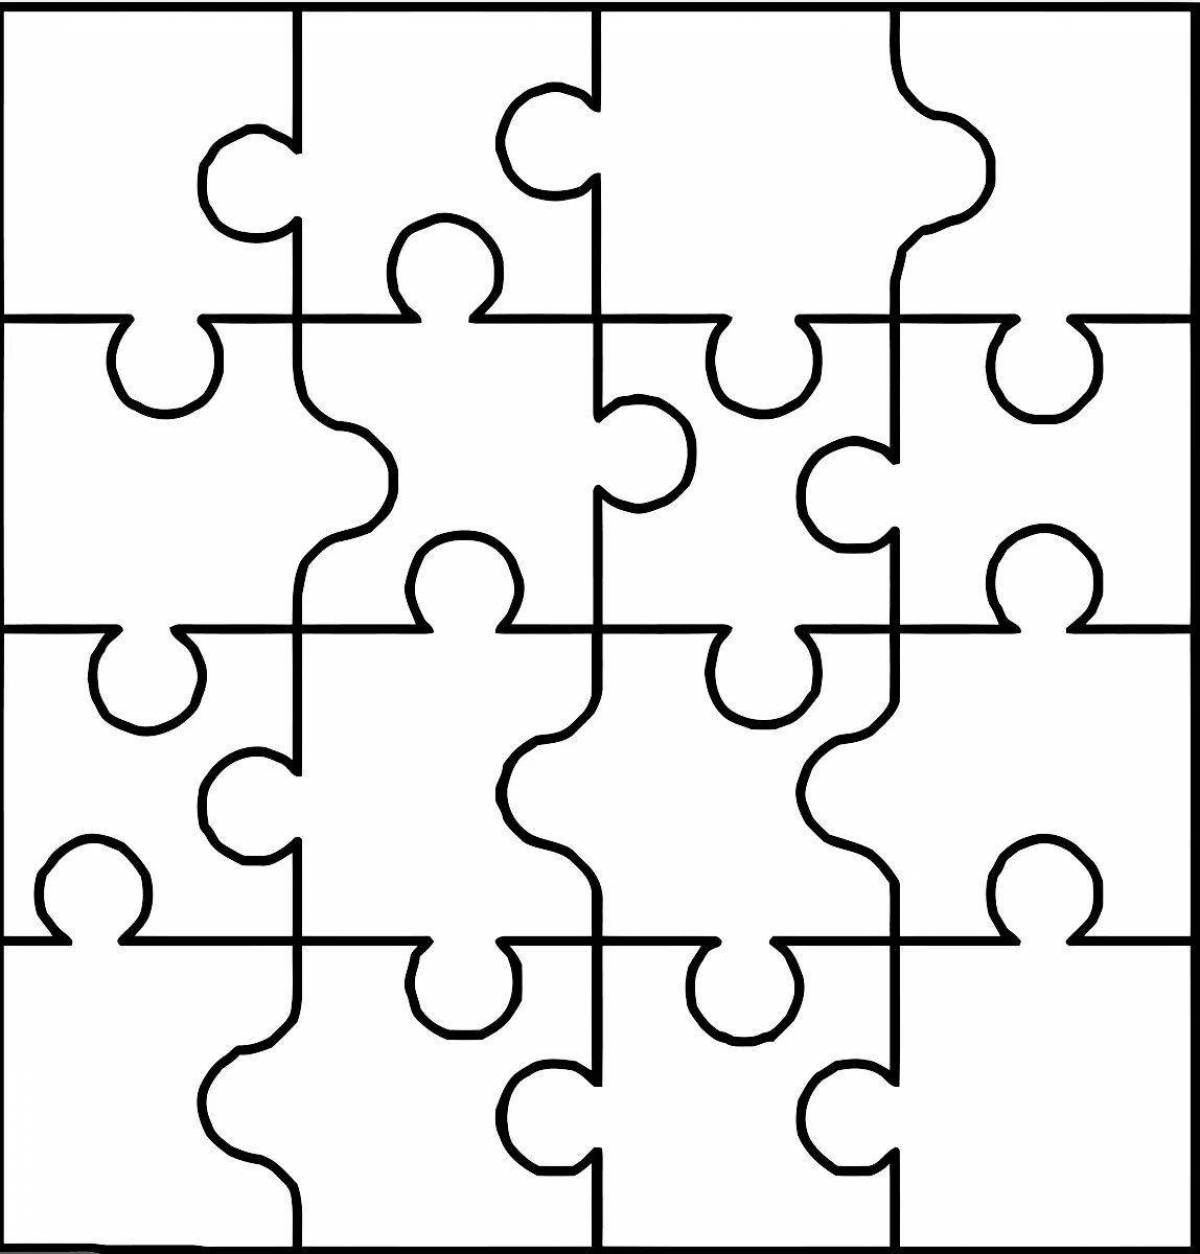 Complex coloring pages and puzzles